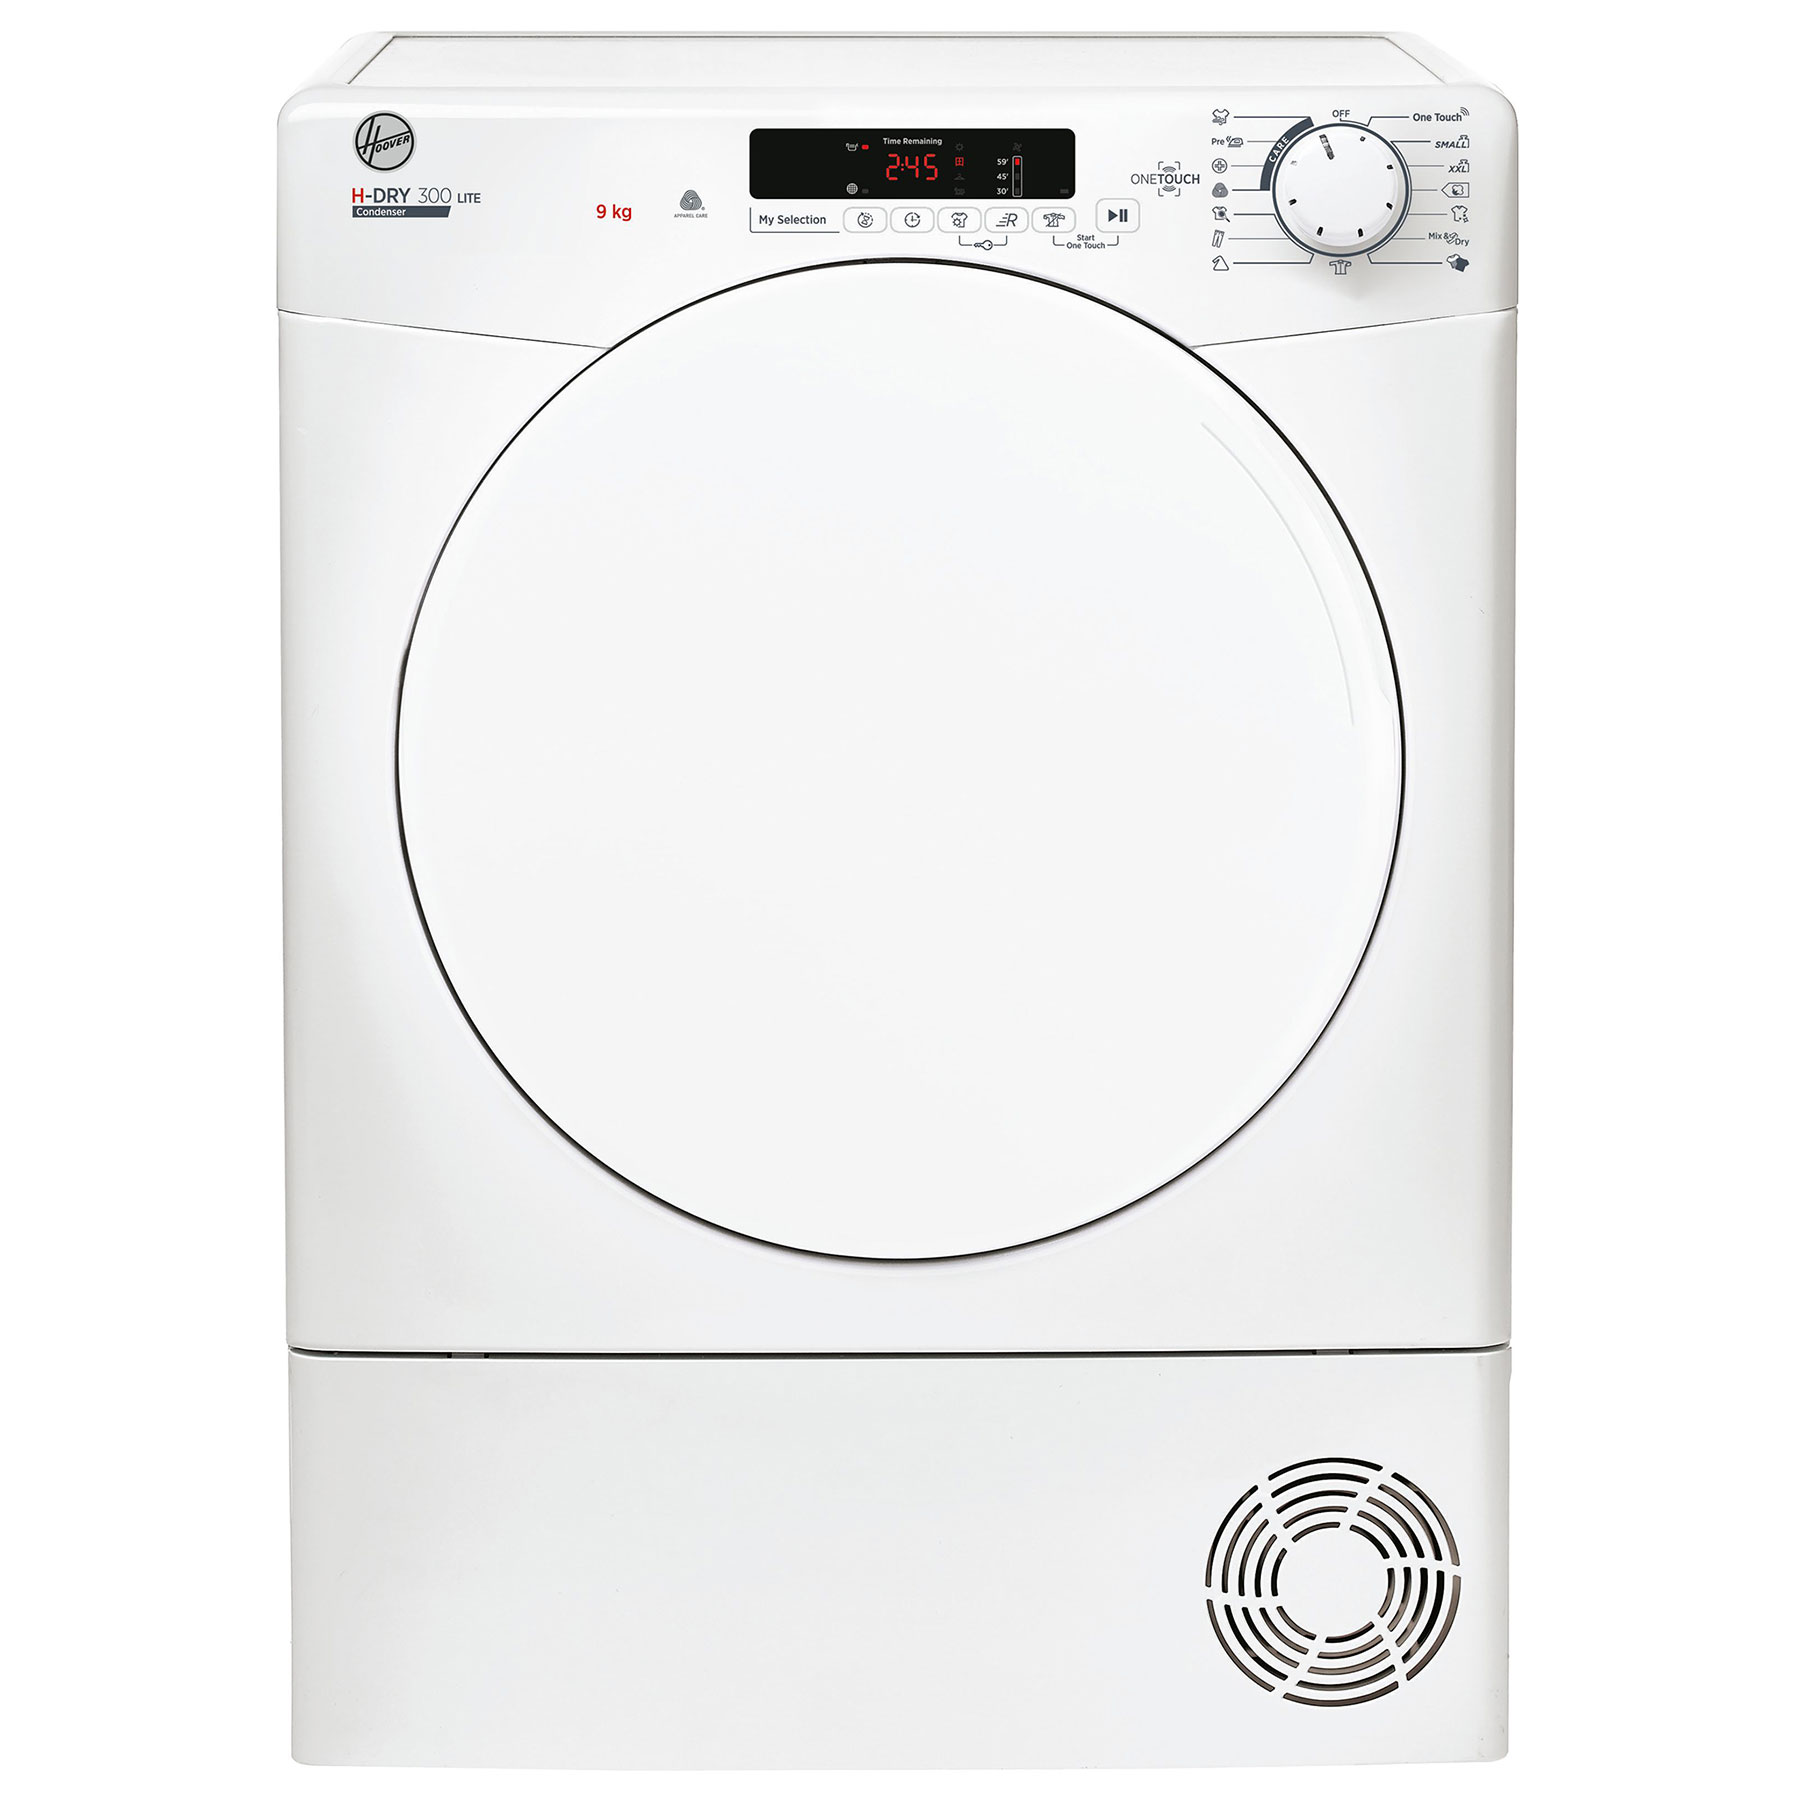 Image of Hoover HLEC9DF 9kg Condenser Dryer in White B Rated Sensor NFC B Rated